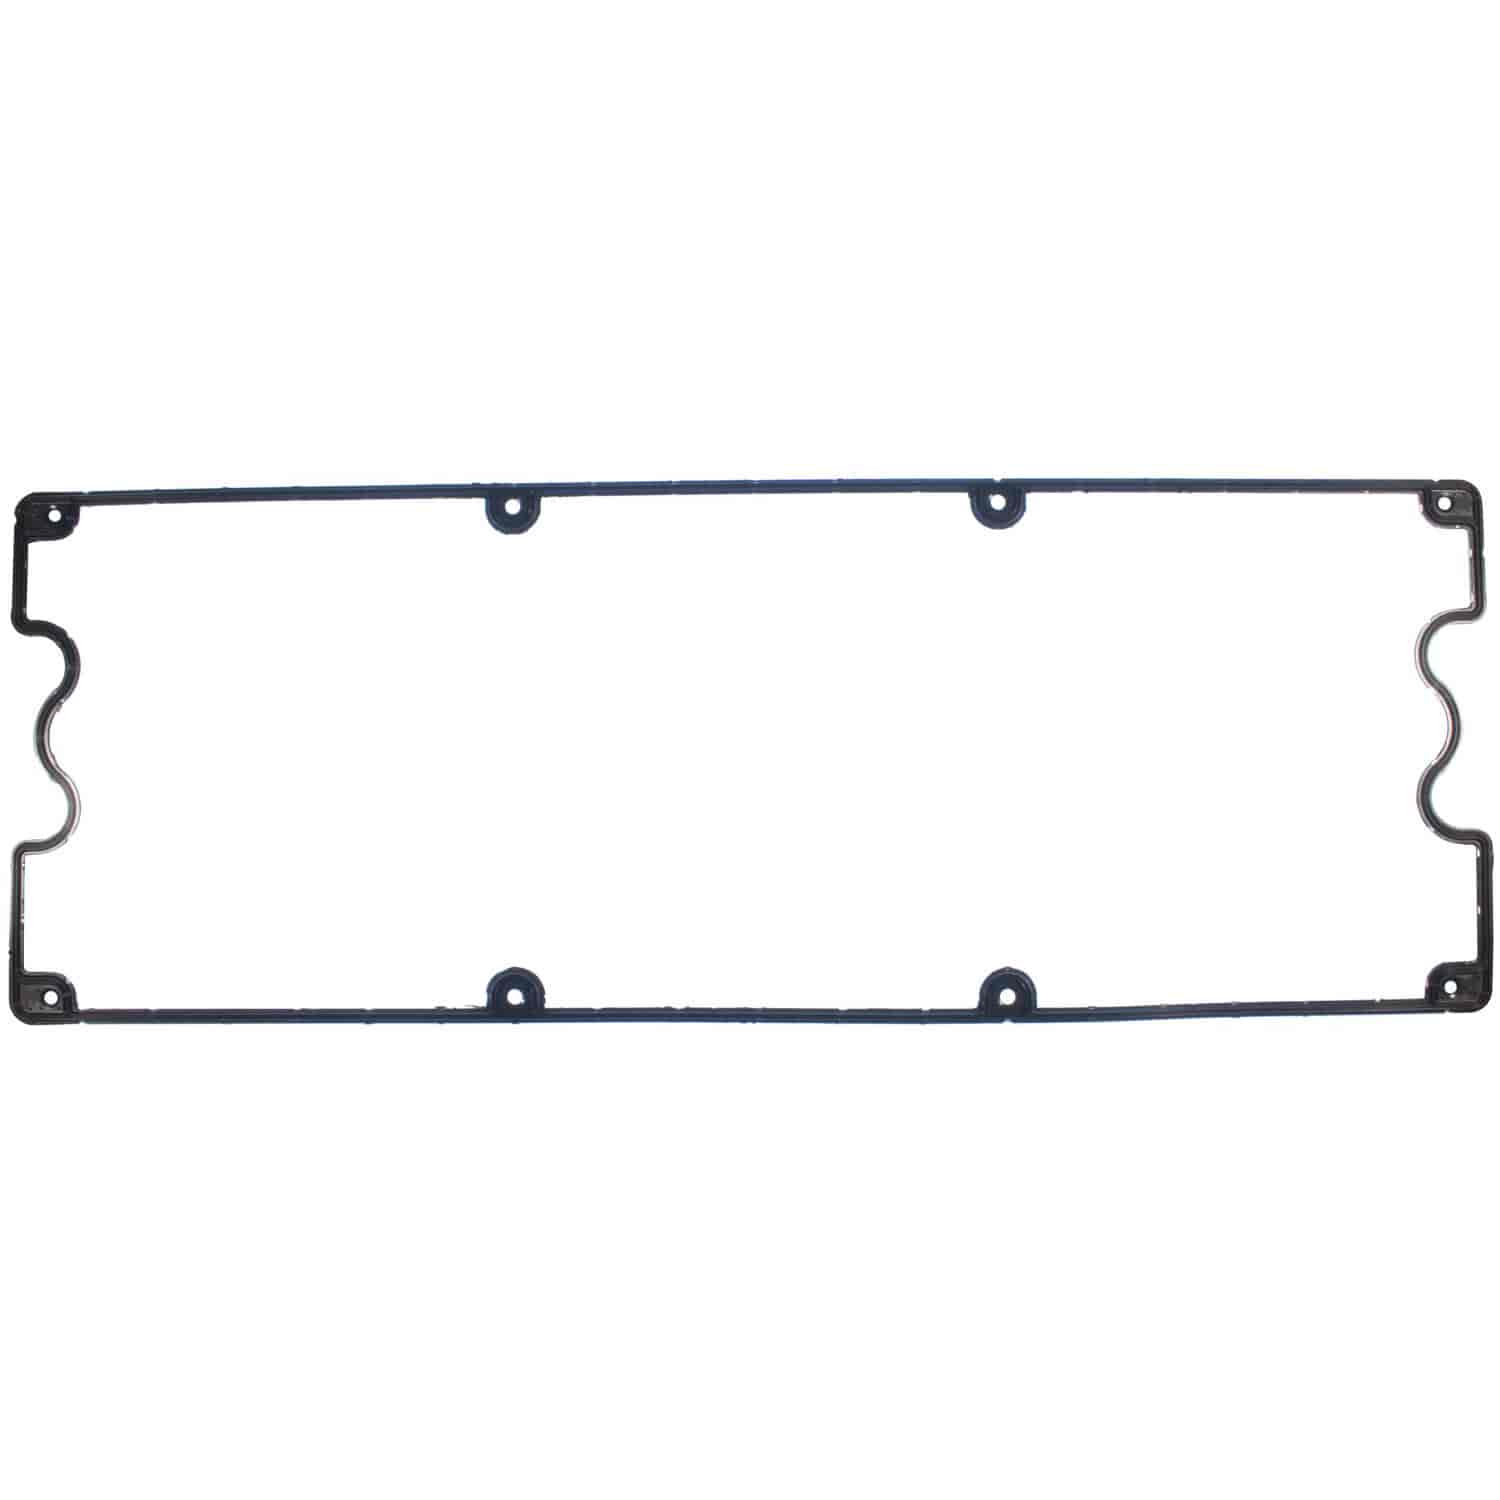 Valve Cover Gasket for Cummins ISX Engines